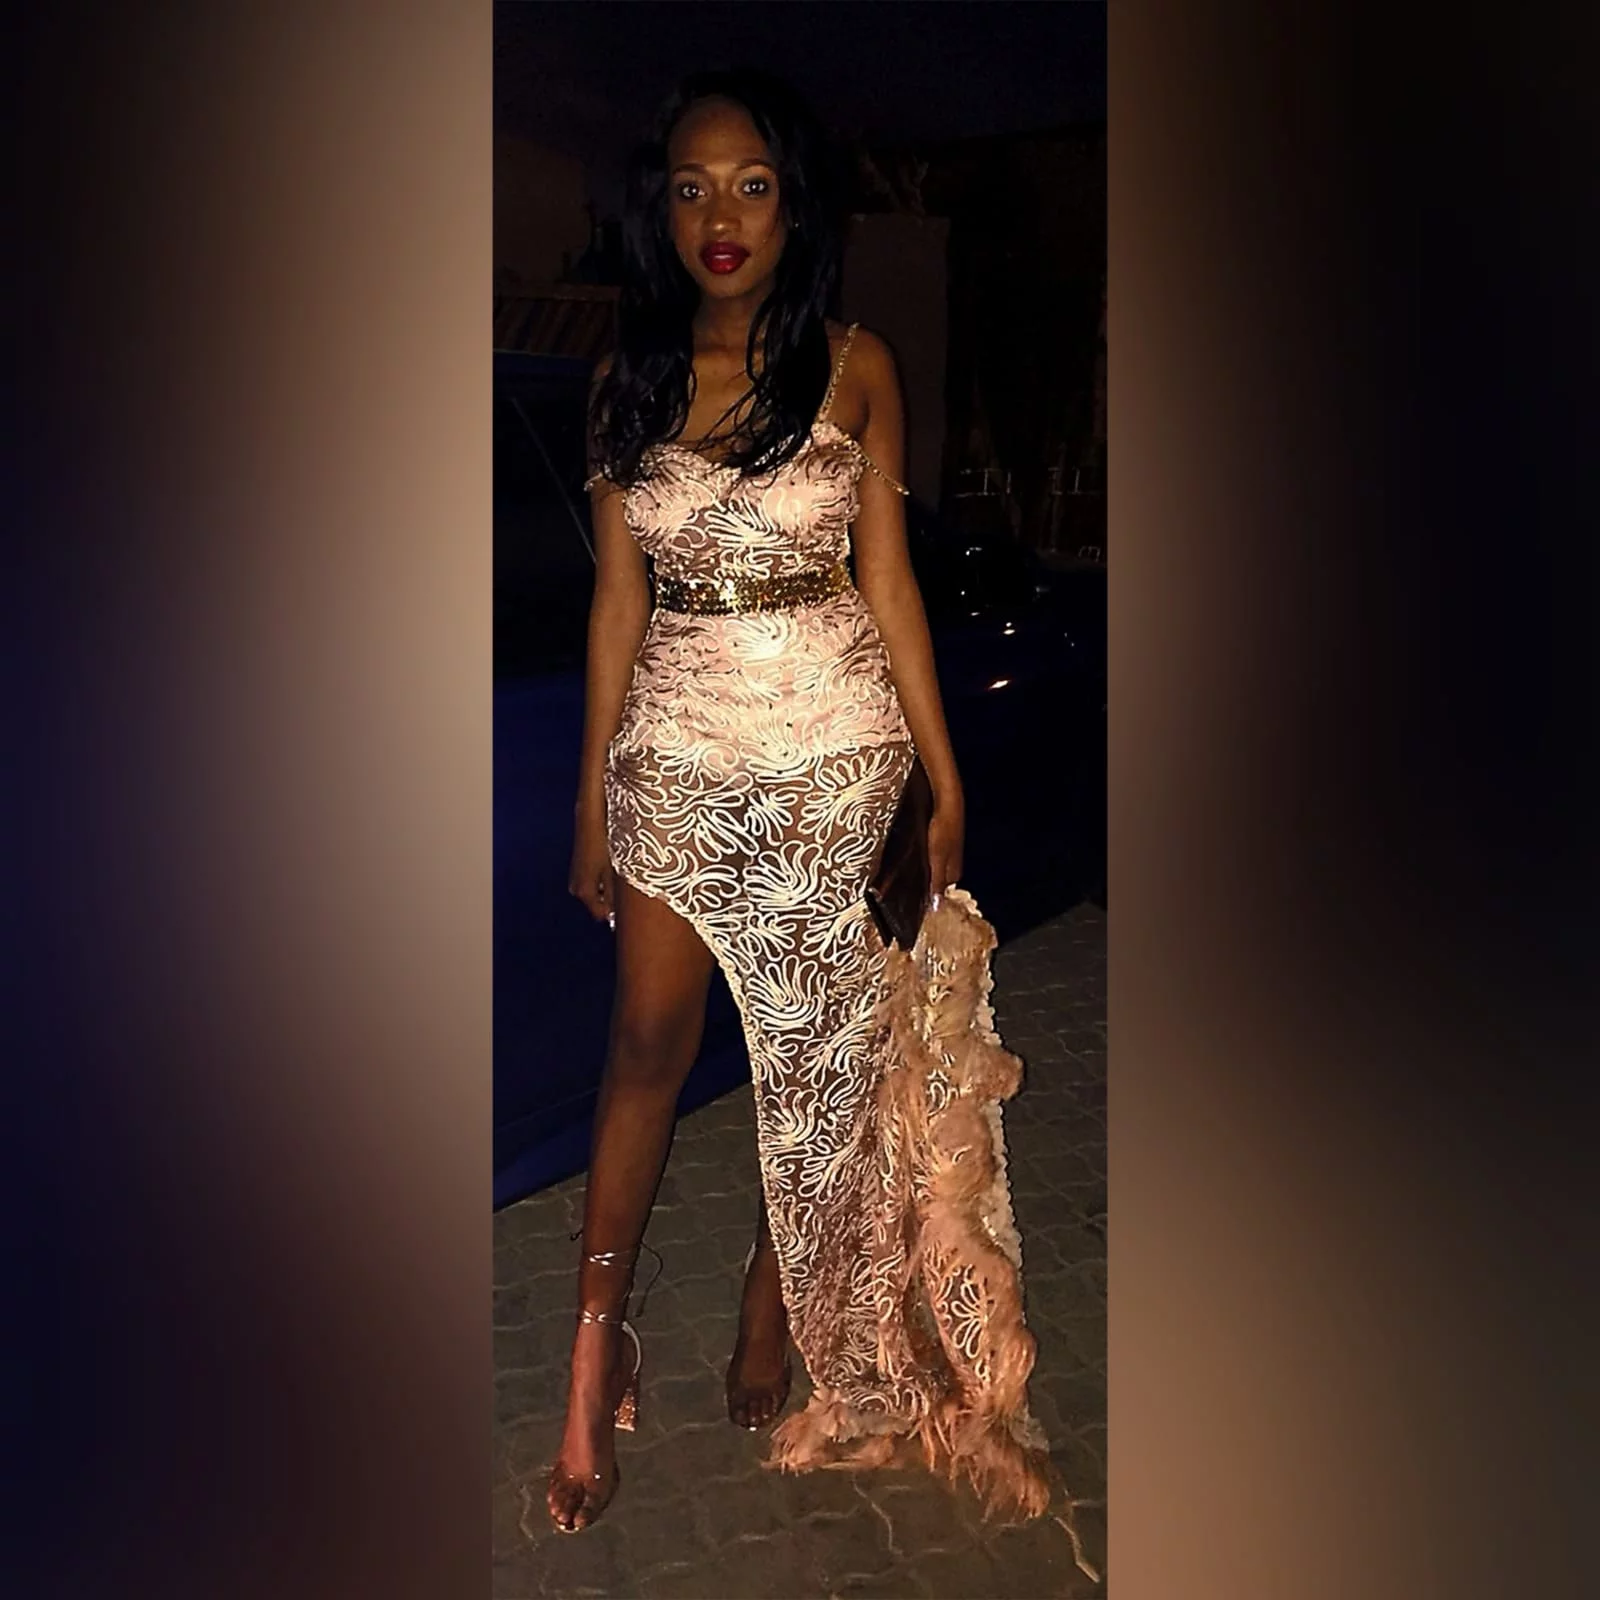 Gold sheer beaded corded long matric farewell dress 9 gold sheer beaded corded long matric farewell dress with a side slit and side train detailed with 3d lace feathers. With an off shoulder strap, removable gold belt.